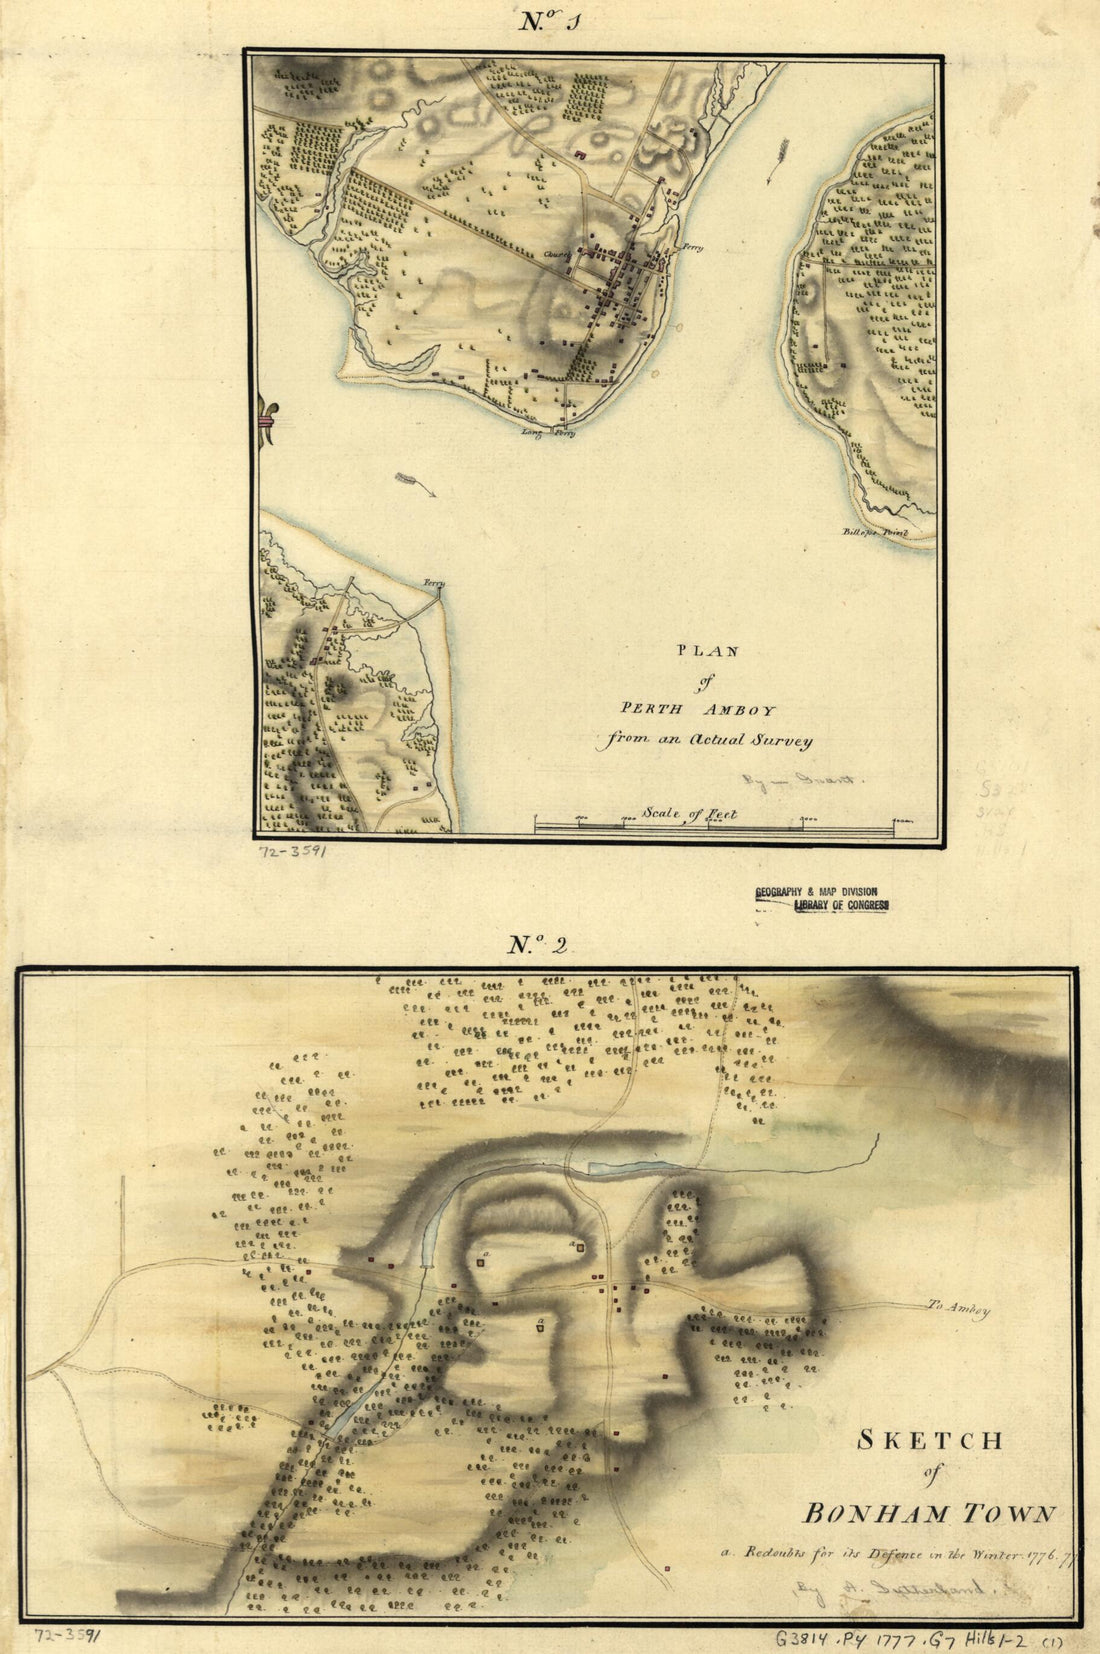 This old map of Plan of Perth Amboy from an Actual Survey. Sketch of Bonham Town from 1777 was created by Alexander [Sutherland, James Grant in 1777